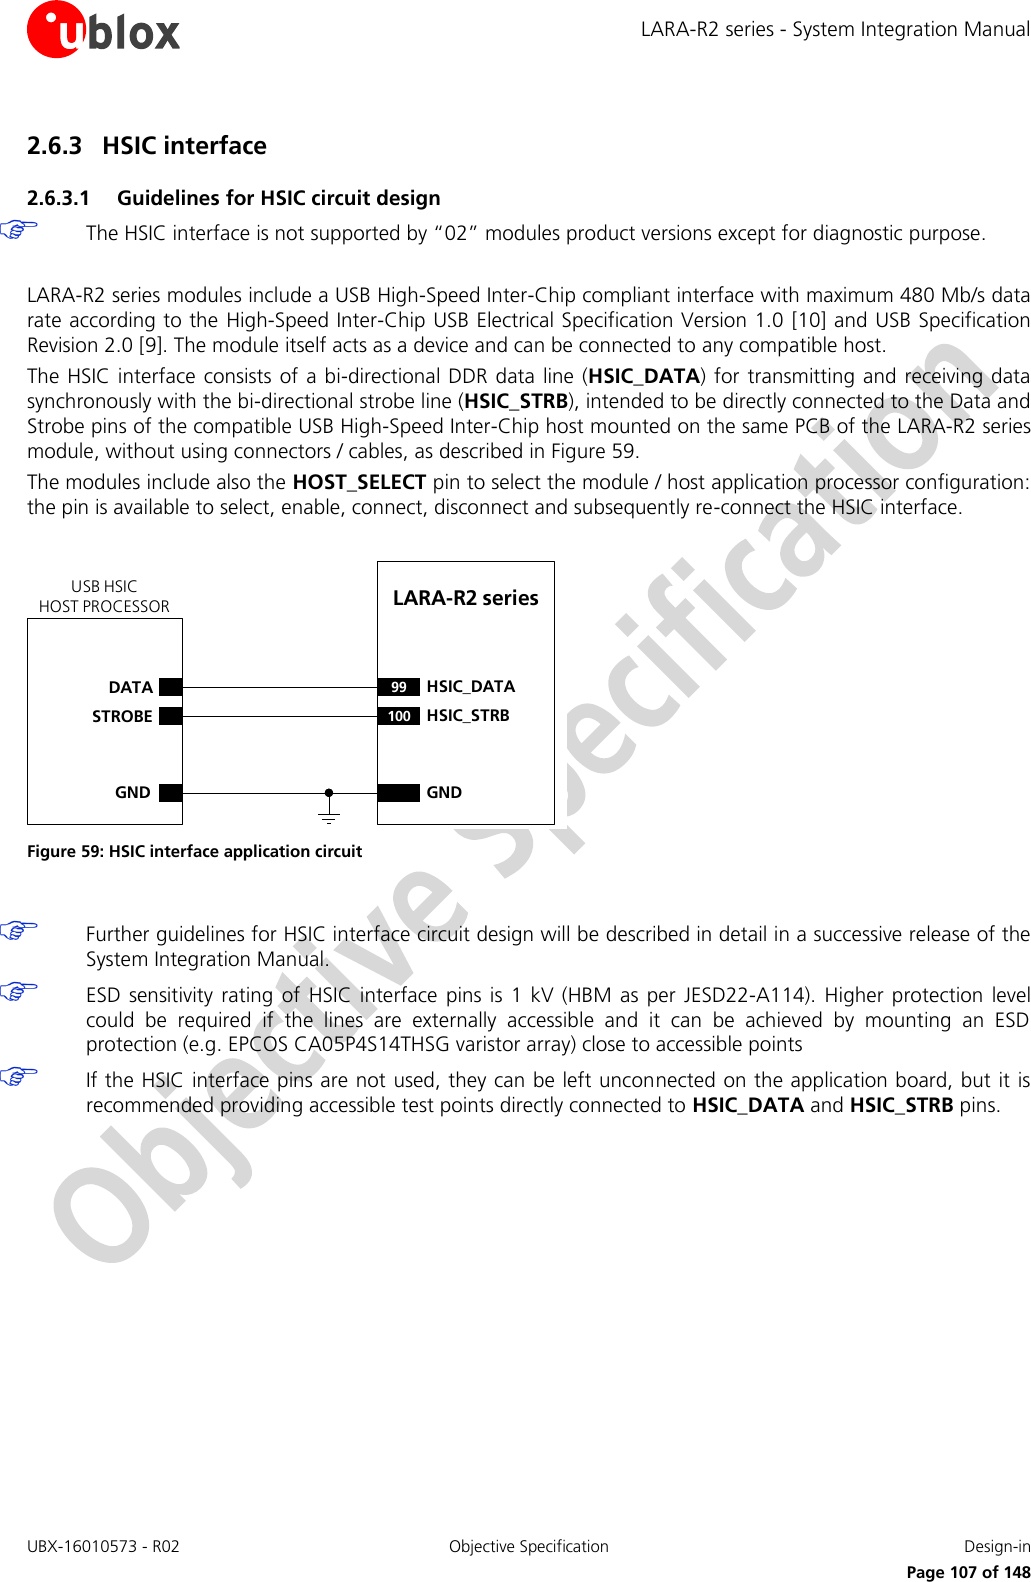 LARA-R2 series - System Integration Manual UBX-16010573 - R02 Objective Specification  Design-in     Page 107 of 148 2.6.3 HSIC interface 2.6.3.1 Guidelines for HSIC circuit design  The HSIC interface is not supported by “02” modules product versions except for diagnostic purpose.  LARA-R2 series modules include a USB High-Speed Inter-Chip compliant interface with maximum 480 Mb/s data rate according to the High-Speed Inter-Chip USB Electrical Specification Version 1.0 [10] and USB Specification Revision 2.0 [9]. The module itself acts as a device and can be connected to any compatible host. The HSIC interface consists of a  bi-directional  DDR data line (HSIC_DATA) for  transmitting and  receiving data synchronously with the bi-directional strobe line (HSIC_STRB), intended to be directly connected to the Data and Strobe pins of the compatible USB High-Speed Inter-Chip host mounted on the same PCB of the LARA-R2 series module, without using connectors / cables, as described in Figure 59. The modules include also the HOST_SELECT pin to select the module / host application processor configuration: the pin is available to select, enable, connect, disconnect and subsequently re-connect the HSIC interface.  LARA-R2 series DATASTROBEGND99 HSIC_DATA100 HSIC_STRBGNDUSB HSICHOST PROCESSOR Figure 59: HSIC interface application circuit   Further guidelines for HSIC interface circuit design will be described in detail in a successive release of the System Integration Manual.  ESD  sensitivity rating  of  HSIC  interface  pins is  1 kV  (HBM  as  per  JESD22-A114).  Higher  protection  level could  be  required  if  the  lines  are  externally  accessible  and  it  can  be  achieved  by  mounting  an  ESD protection (e.g. EPCOS CA05P4S14THSG varistor array) close to accessible points  If the HSIC interface pins are not used, they can be left unconnected on the application board, but it is recommended providing accessible test points directly connected to HSIC_DATA and HSIC_STRB pins.  